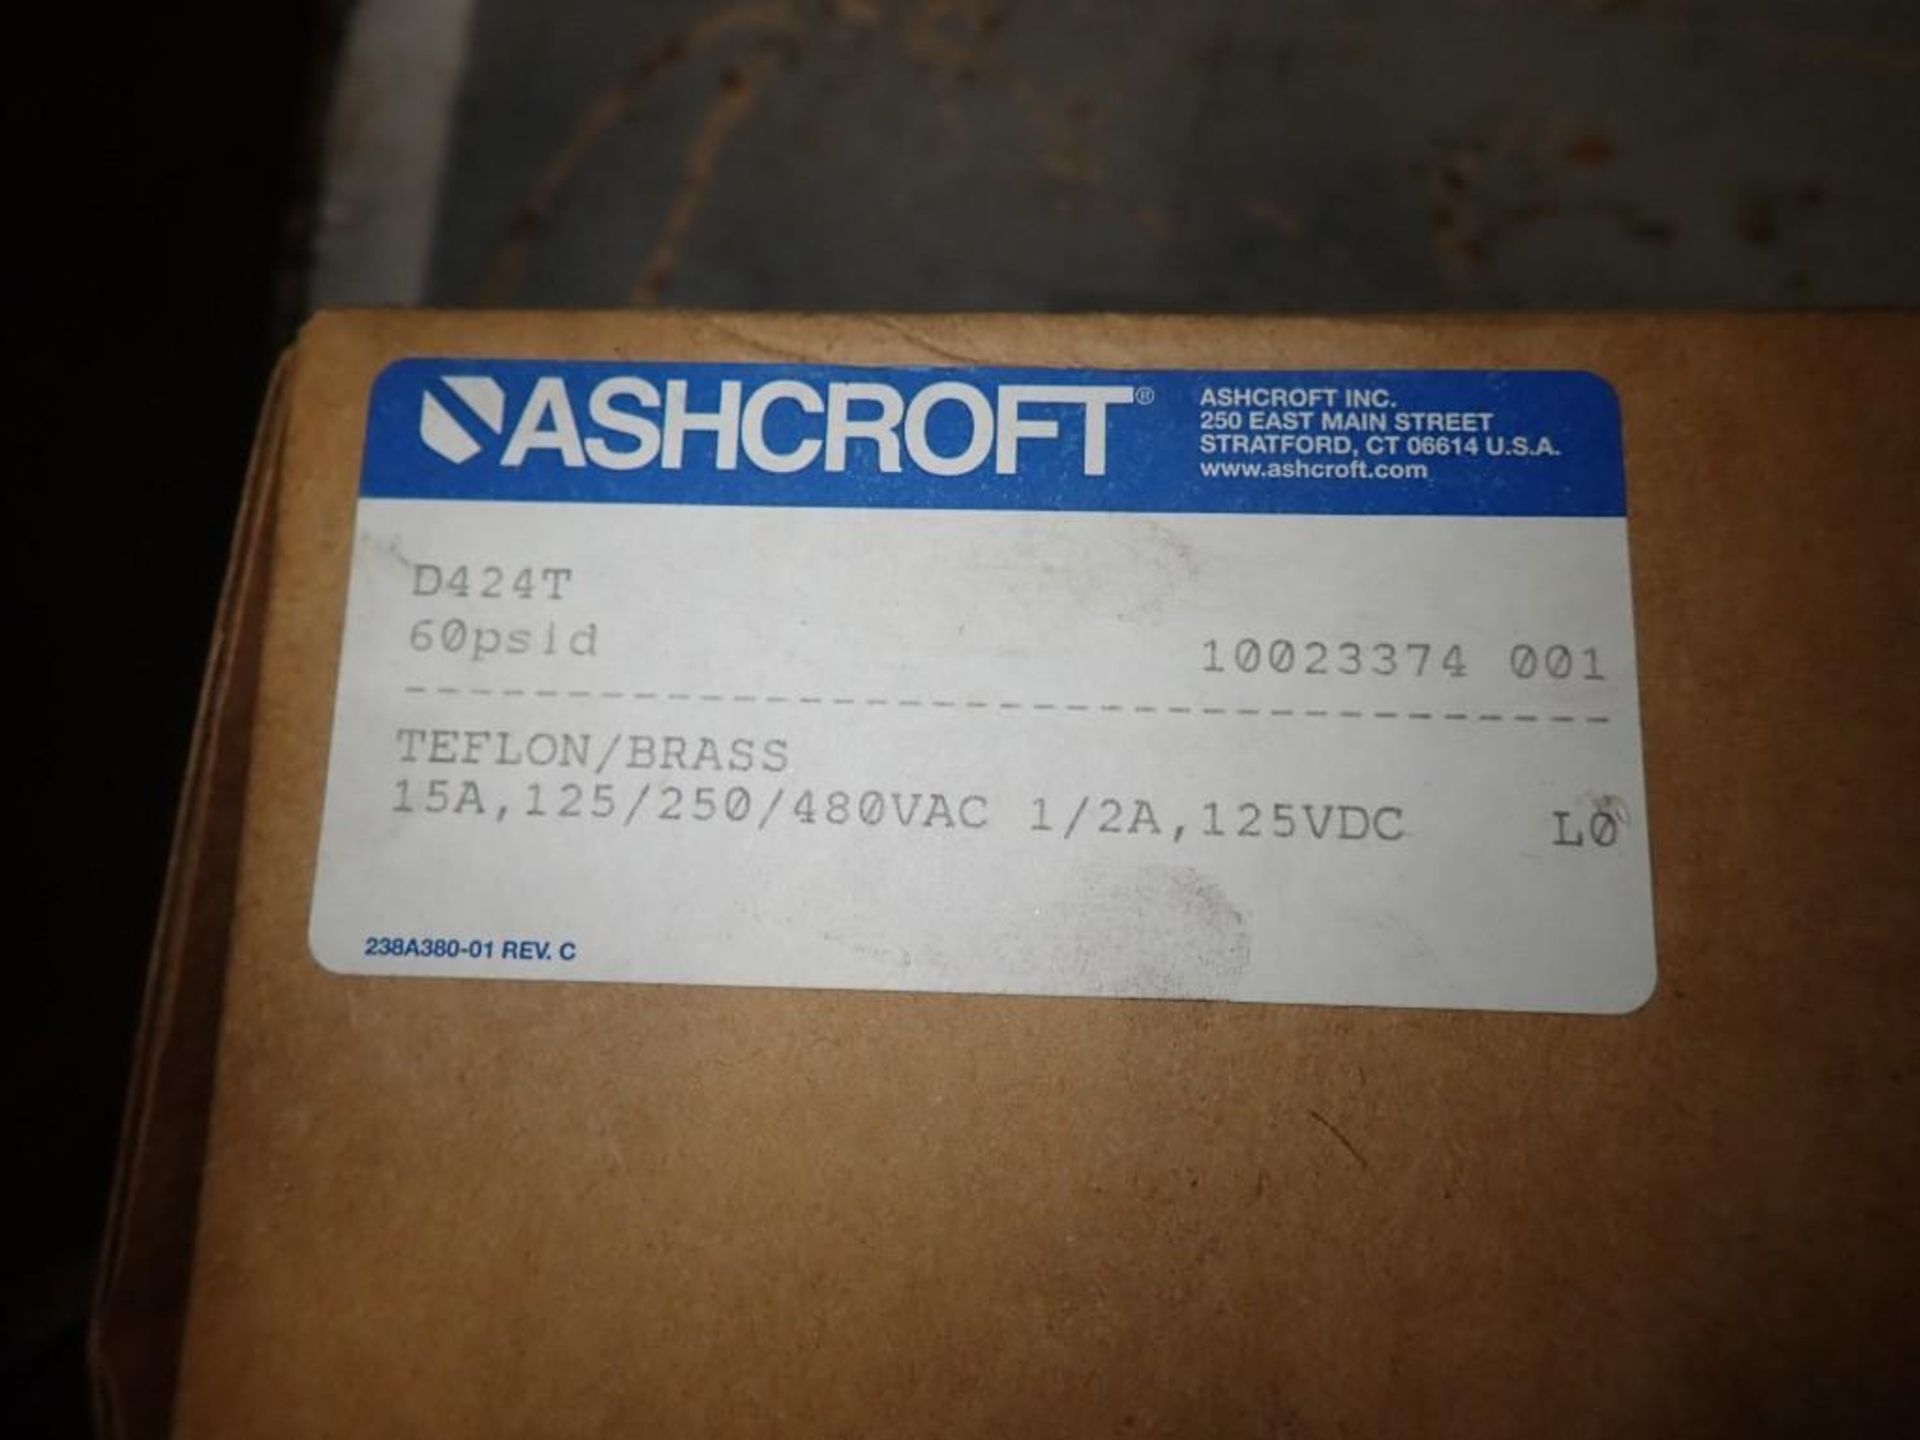 NEW Ashcroft Differential Pressure Switch, # D424T, 60 PSID - Image 3 of 5